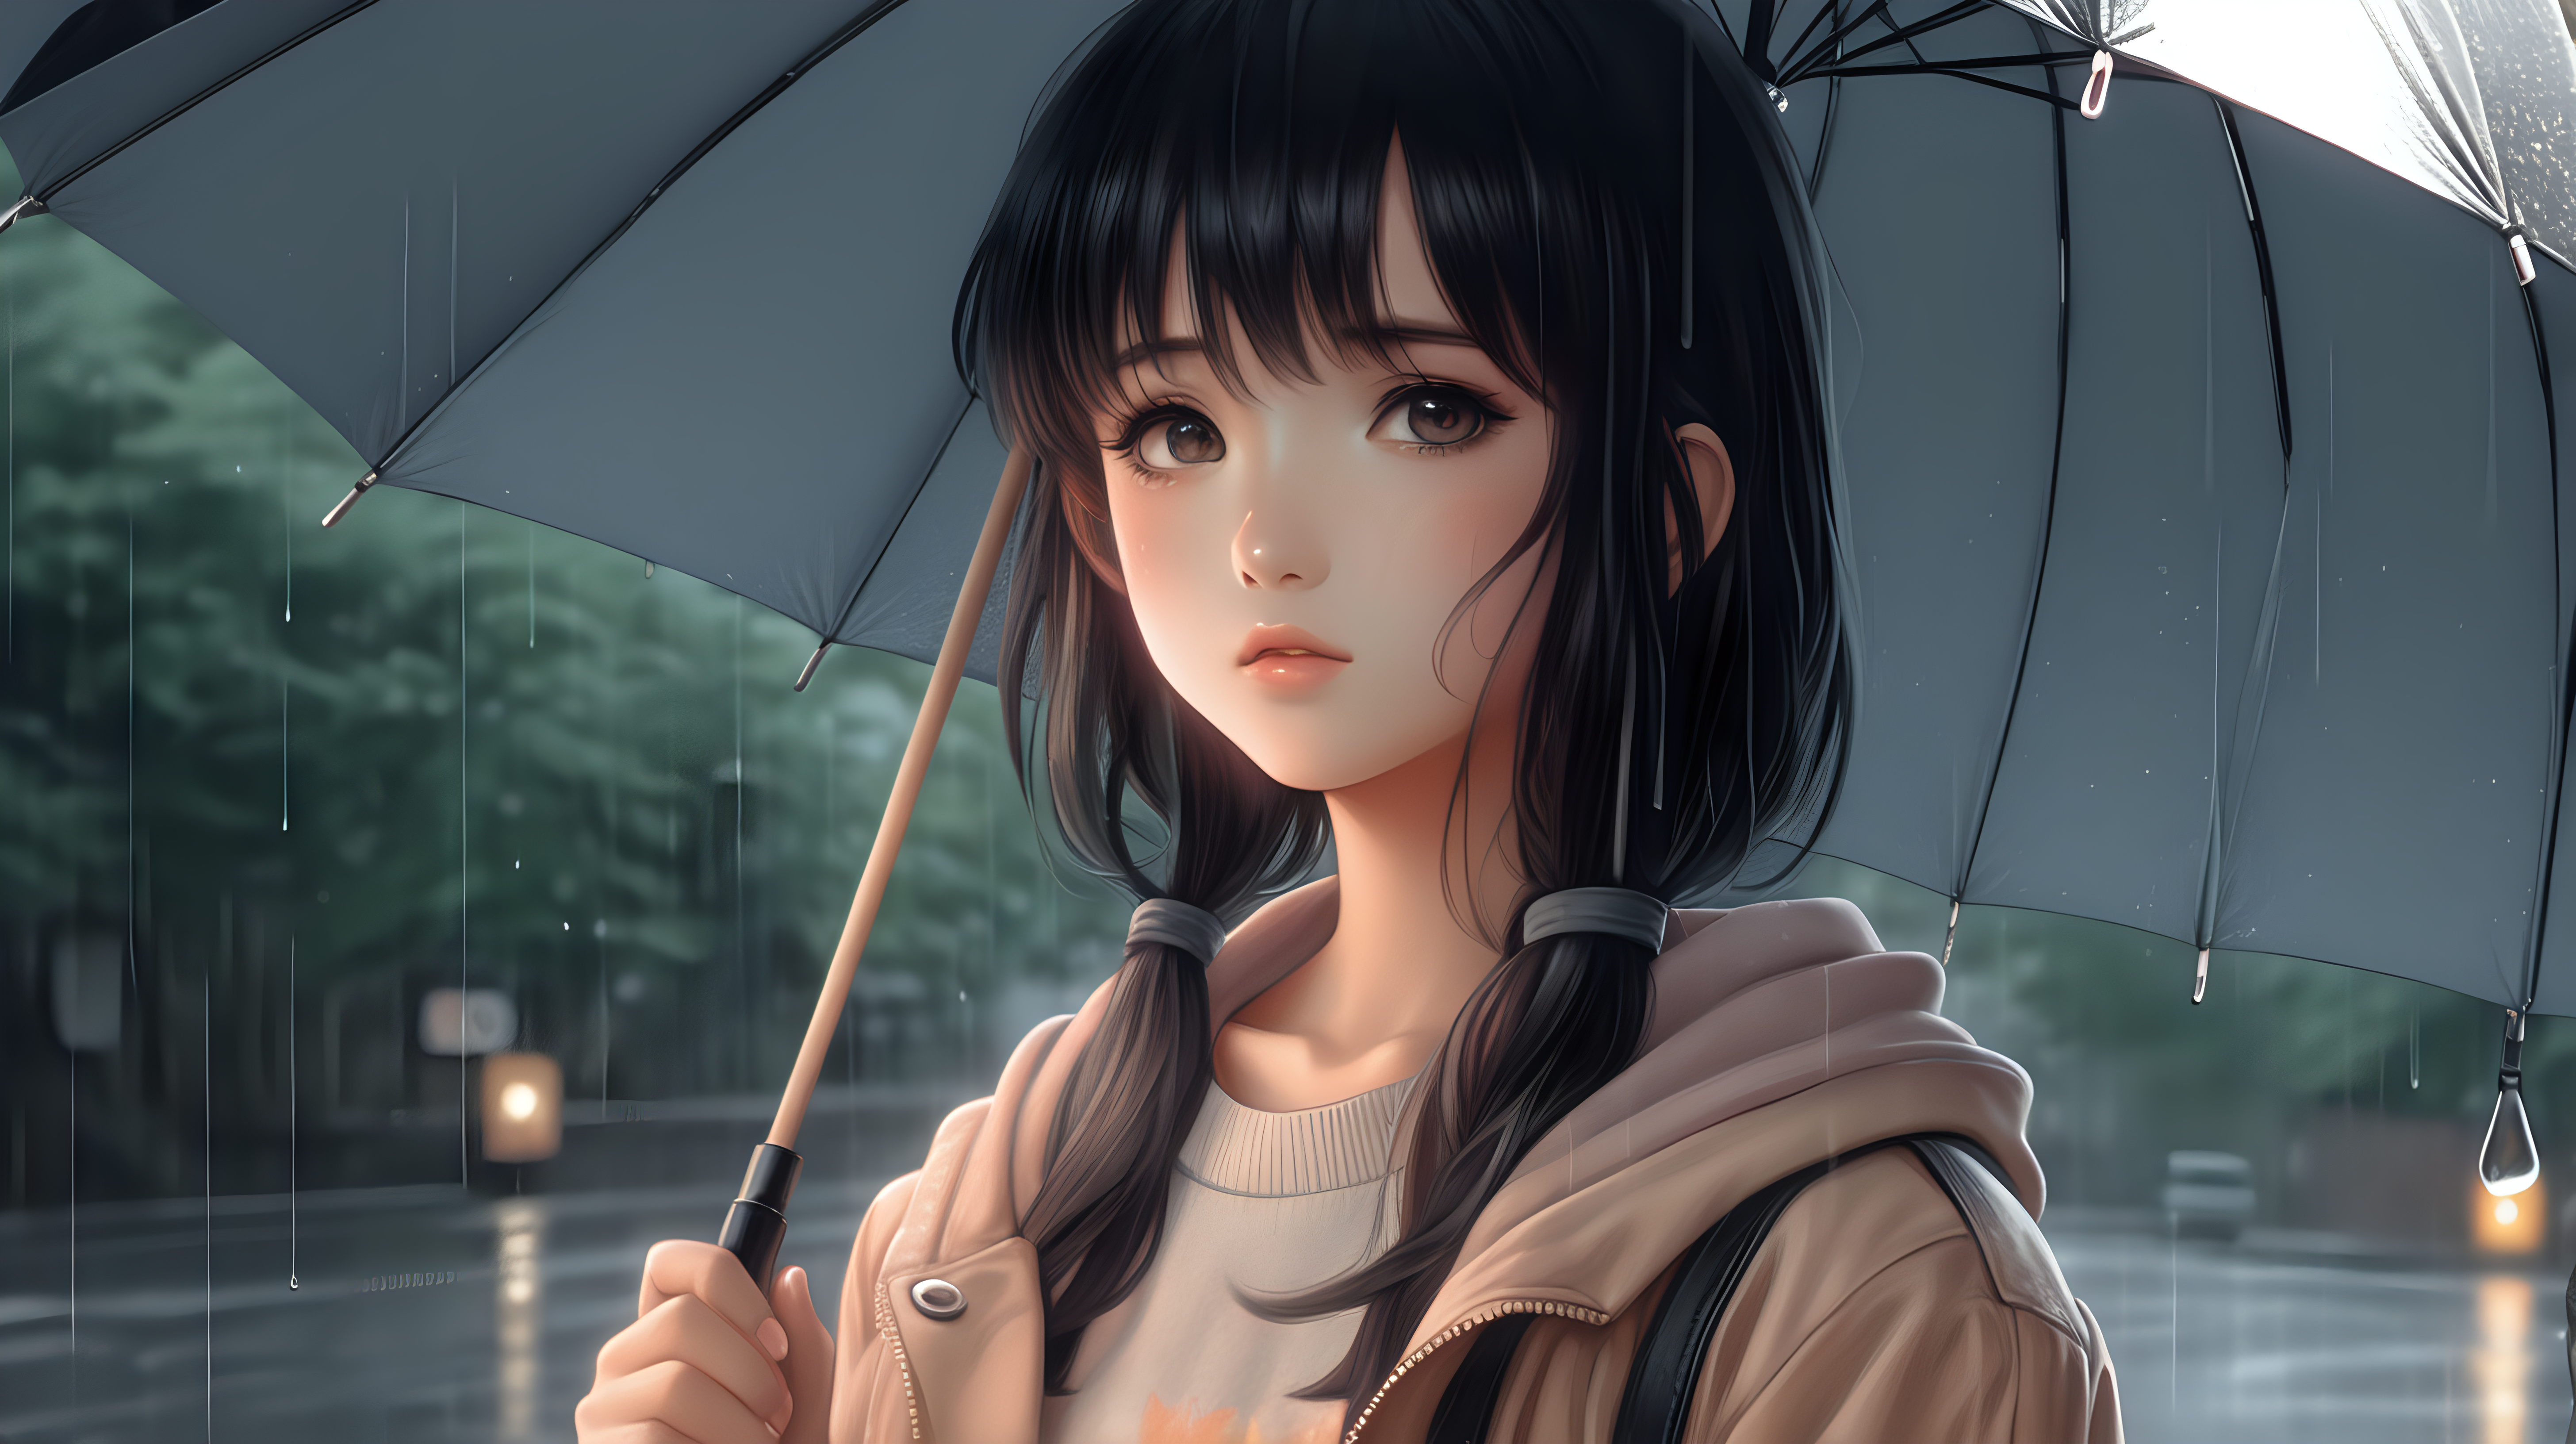 anime girl in the rain, muted pastel colors that look good on craft paper, black hair, holding an umbrella, hd, 4k, realistic,